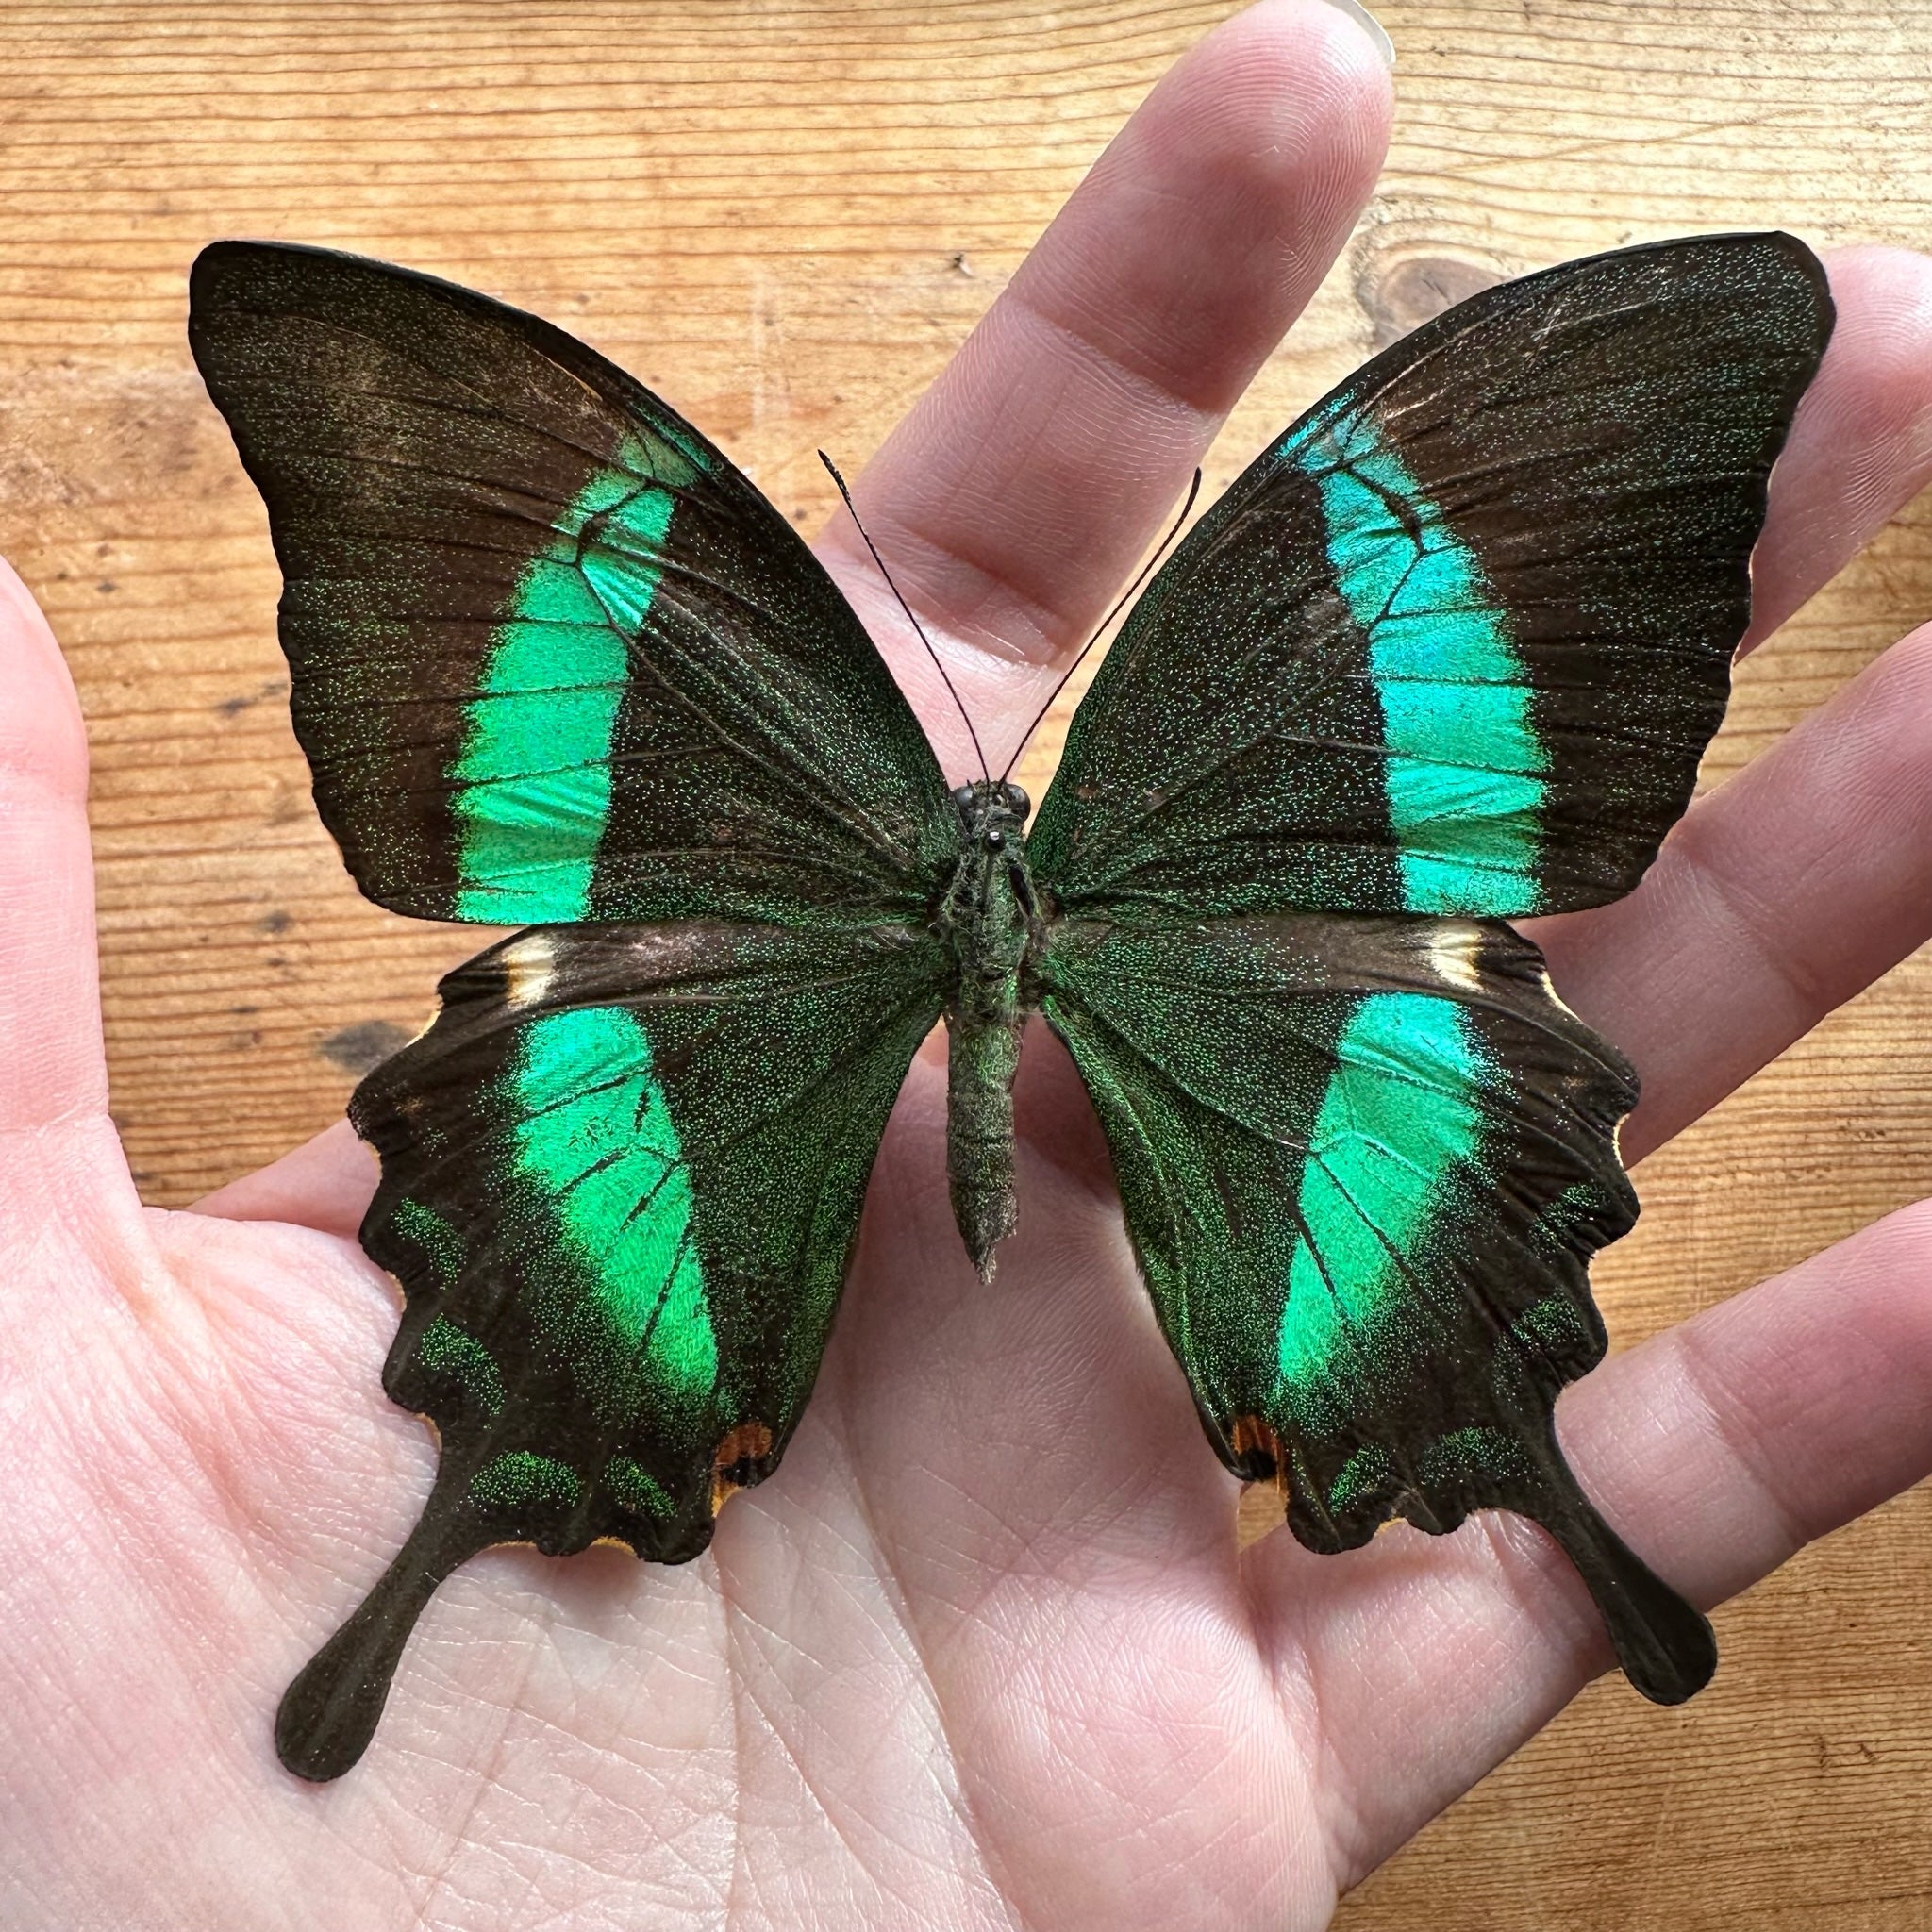 Papilio peranthus, Green Peacock Swallowtail Butterfly